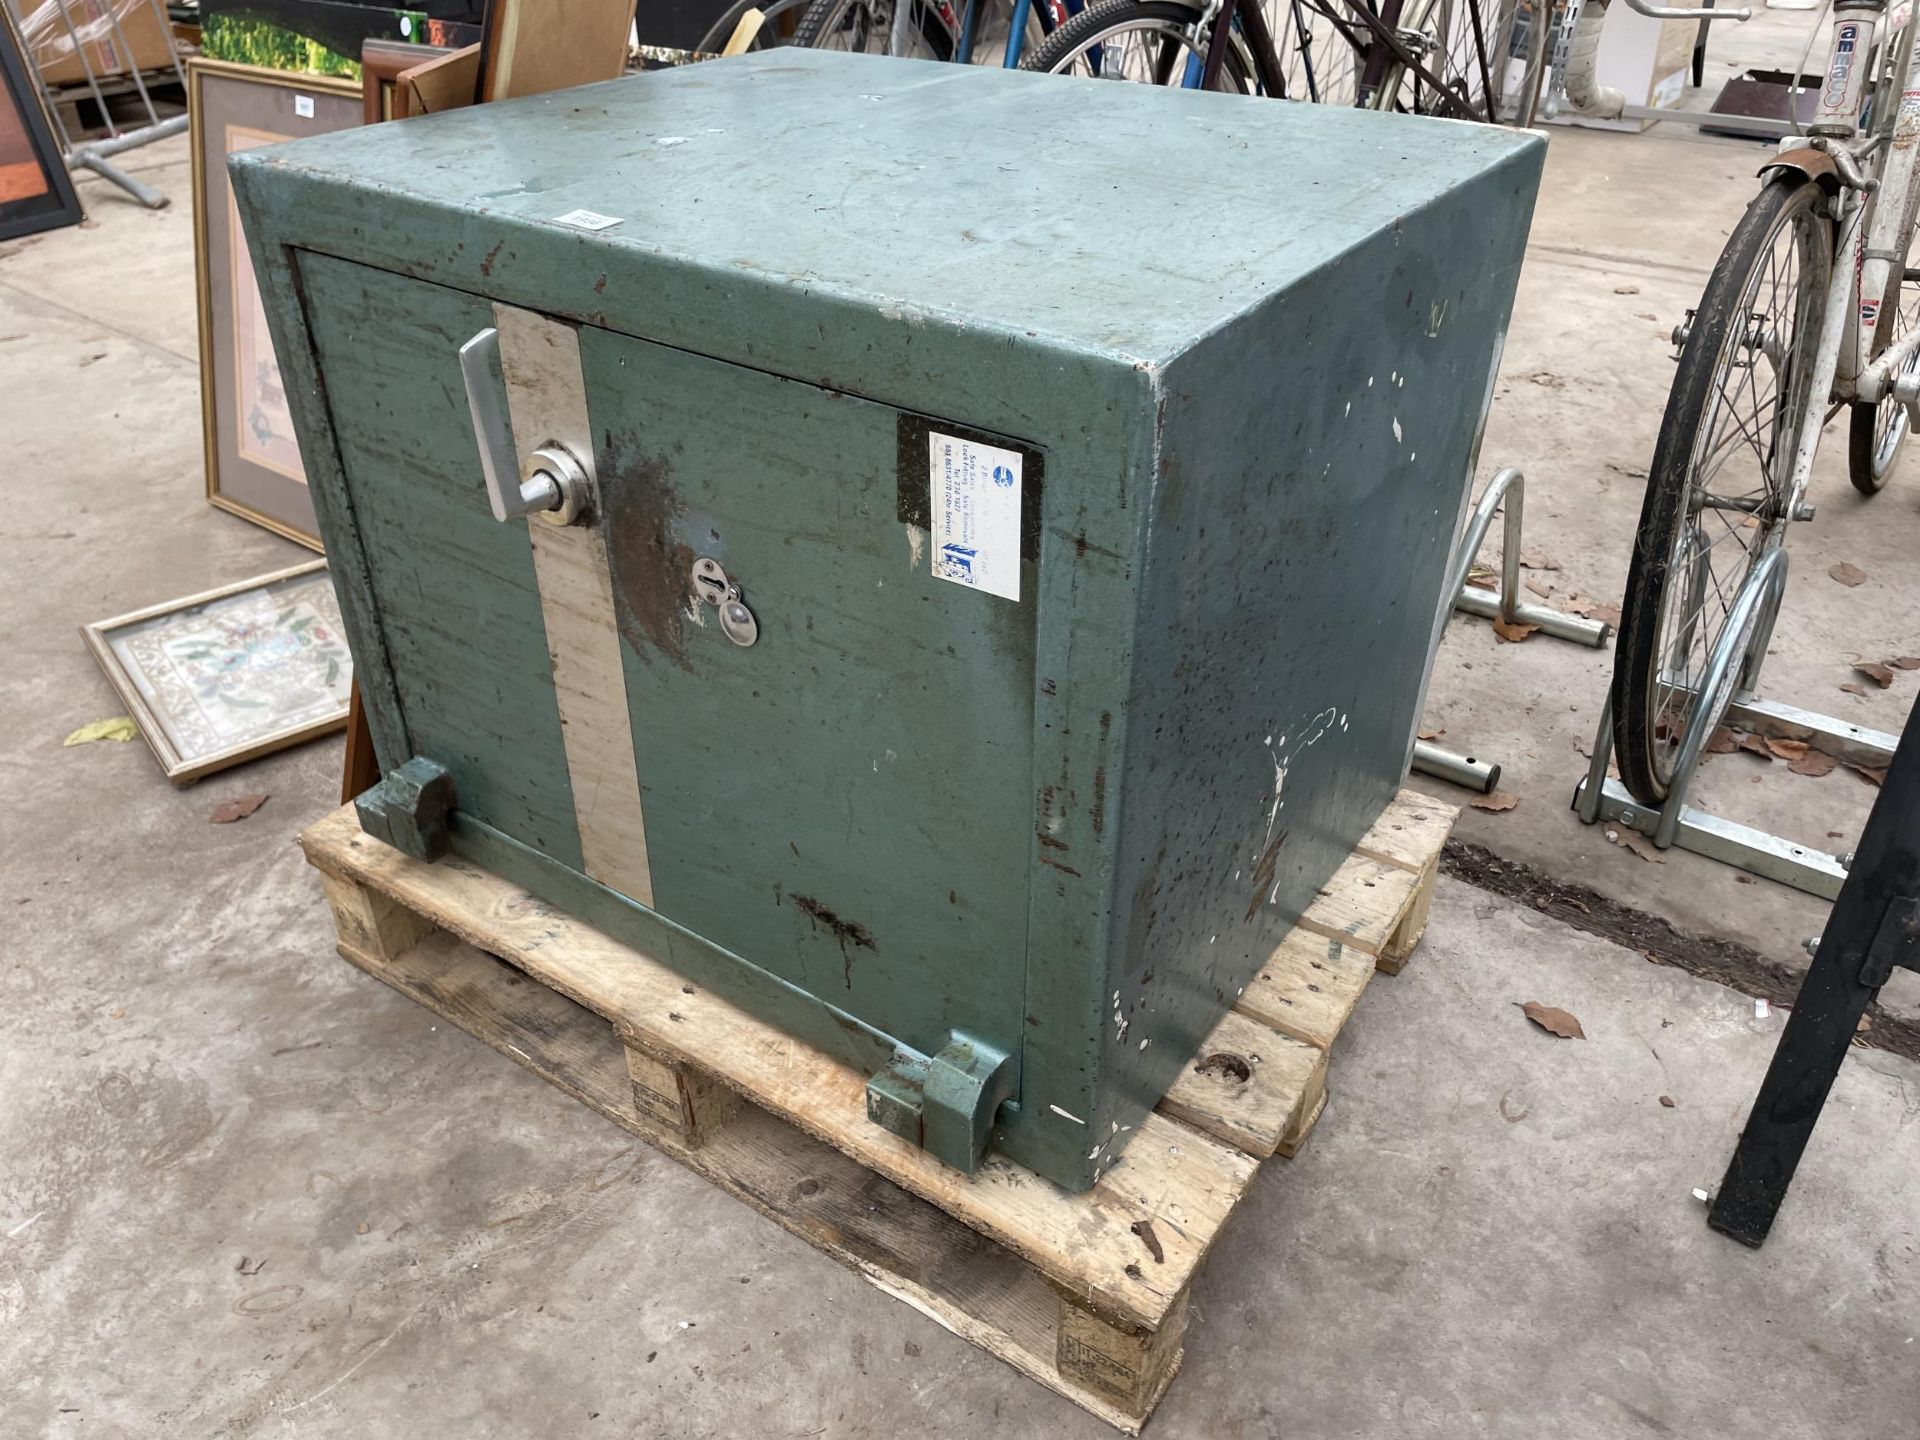 A LARGE HEAVY DUTY SAFE WITH KEY IN THE OFFICE - Image 2 of 9